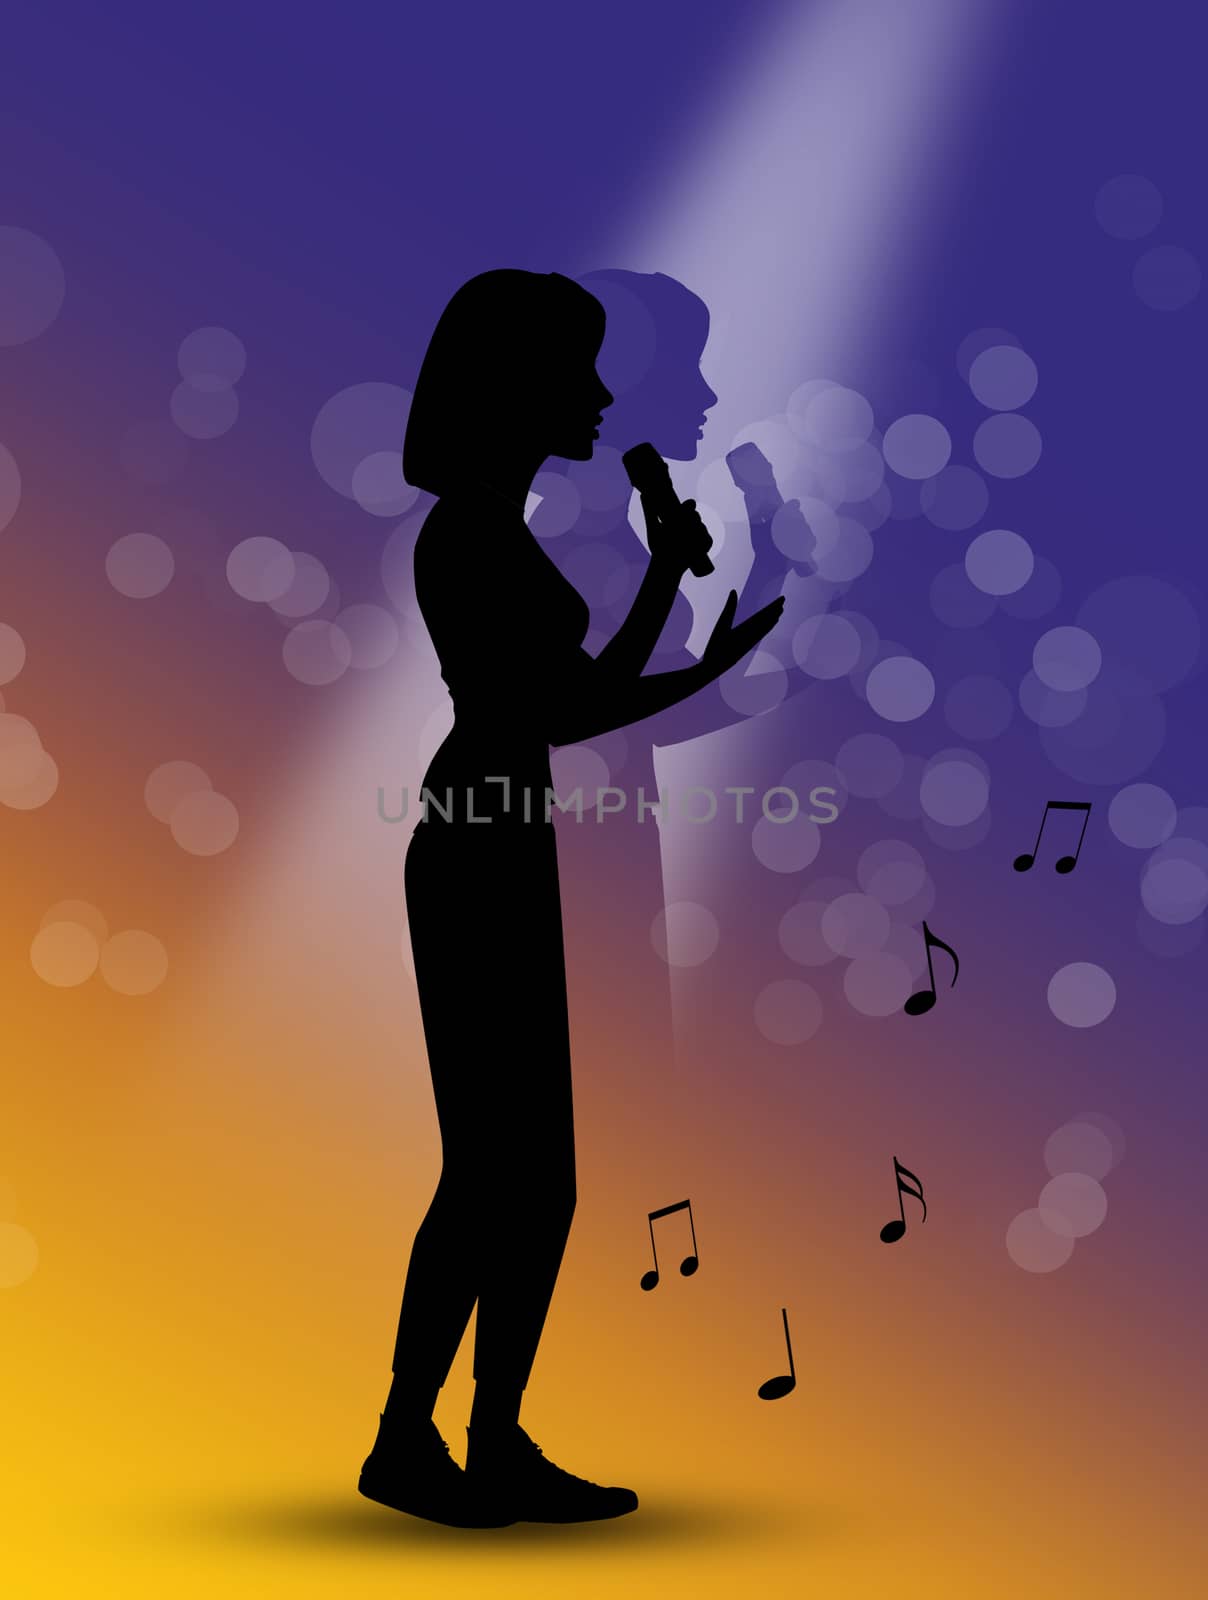 illustration of silhouette of singer by adrenalina